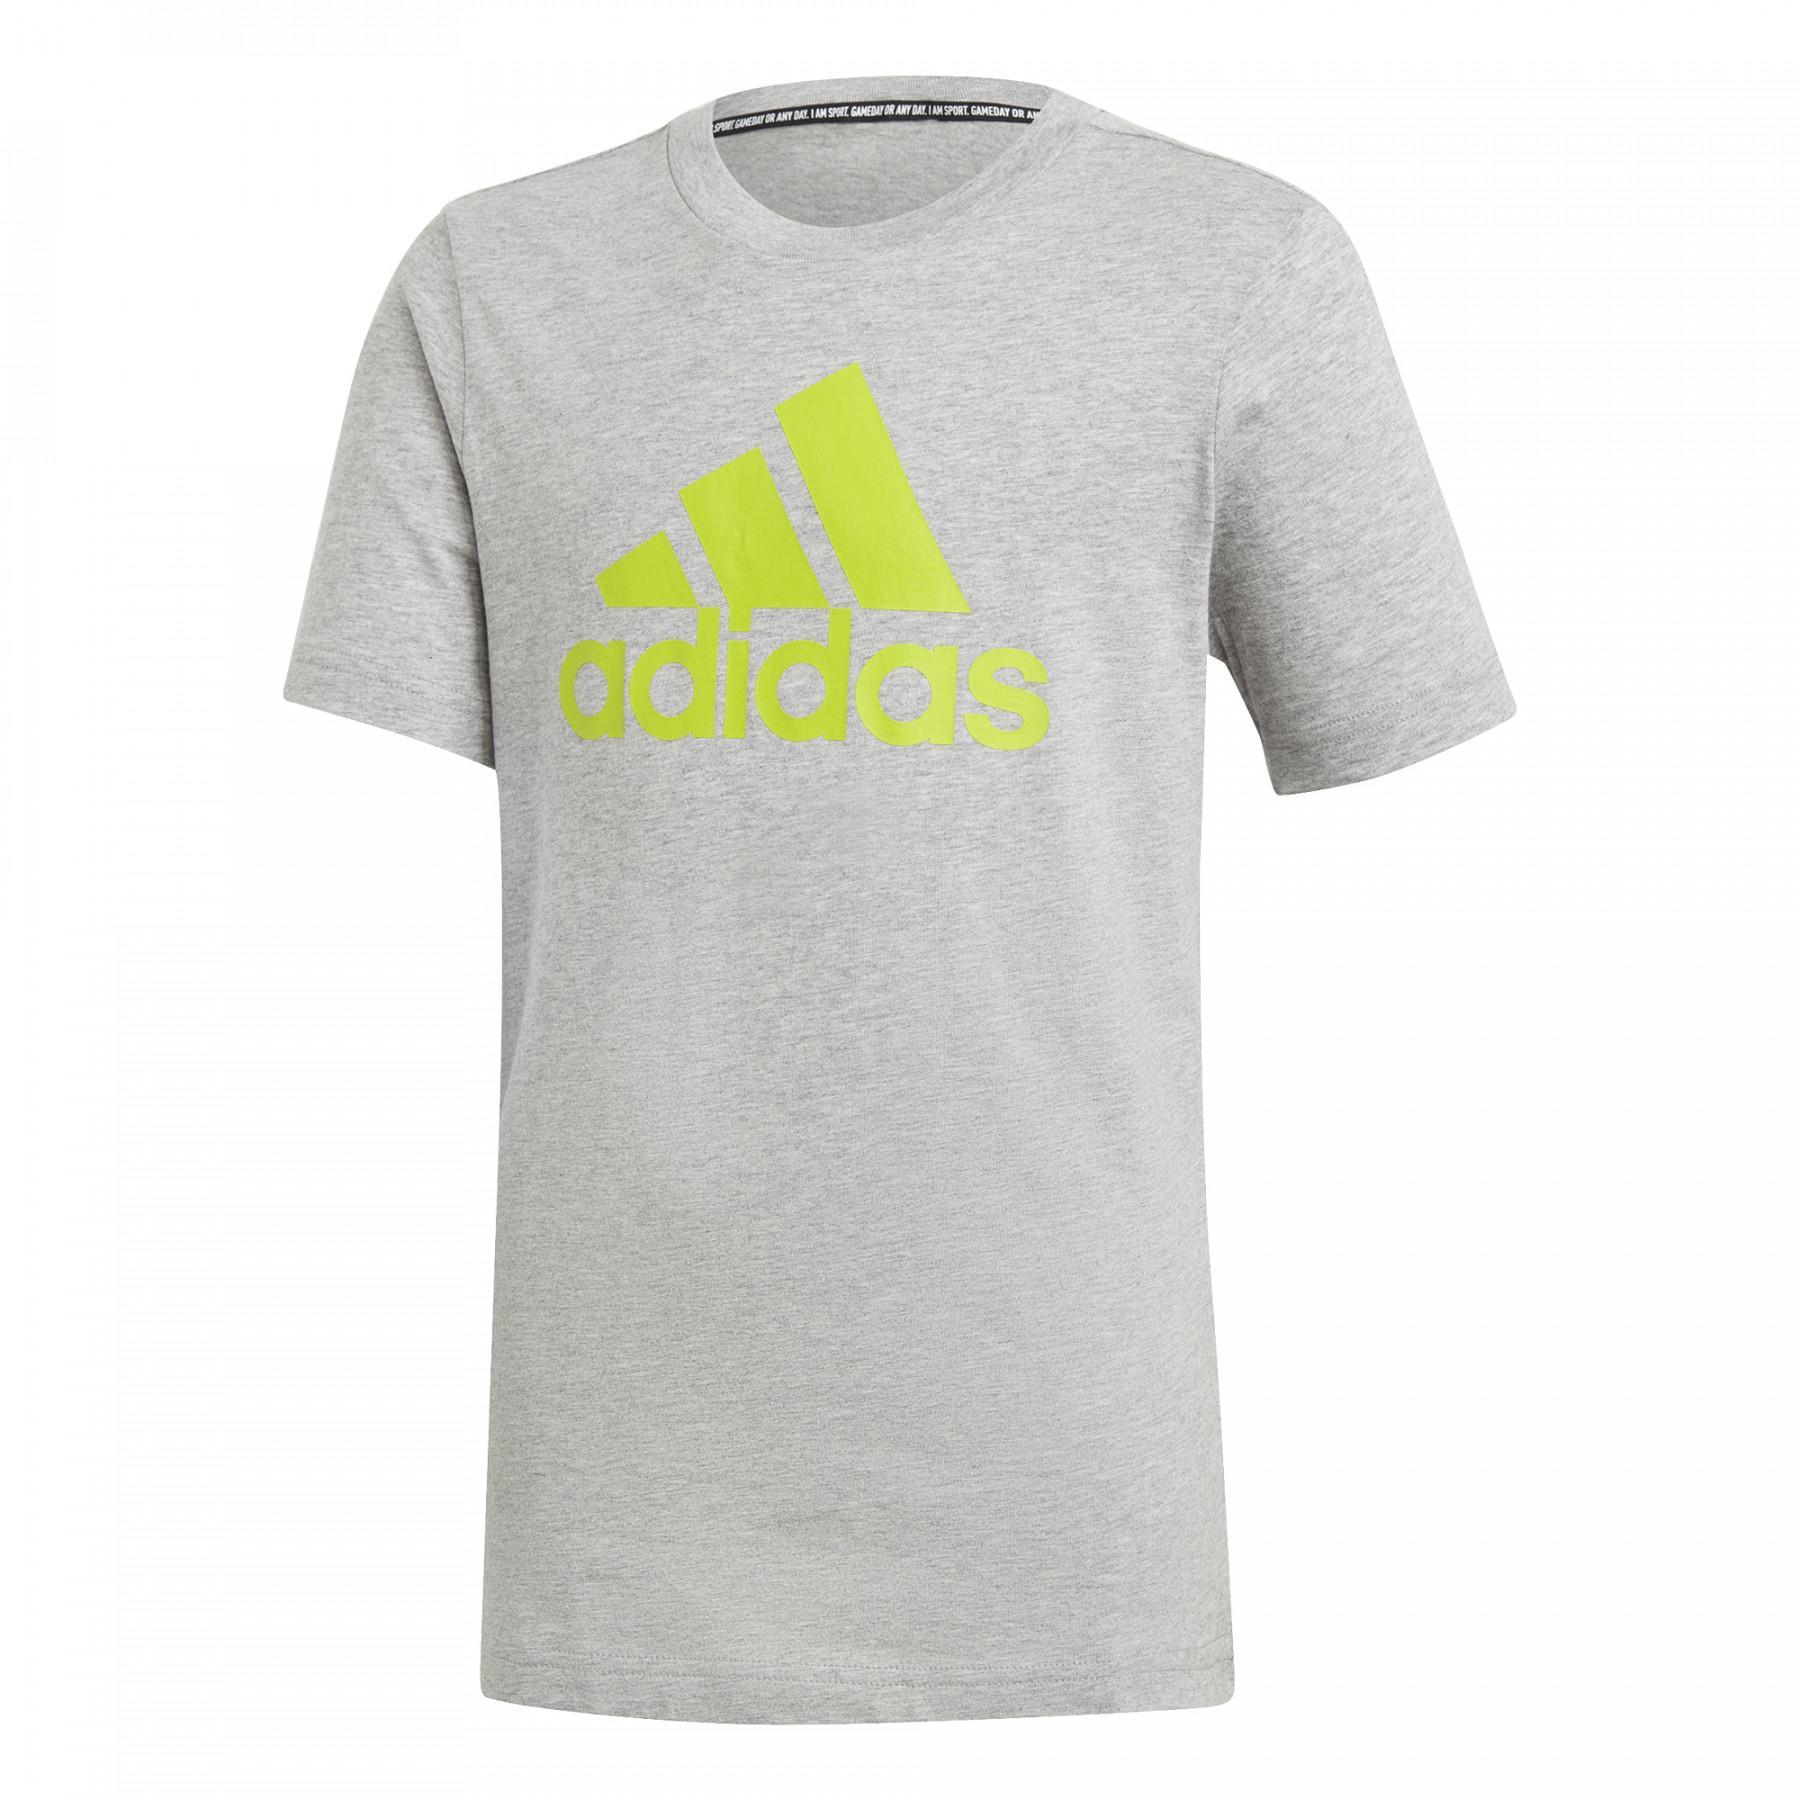 Kinder-T-Shirt adidas Must Haves Badge of Sport